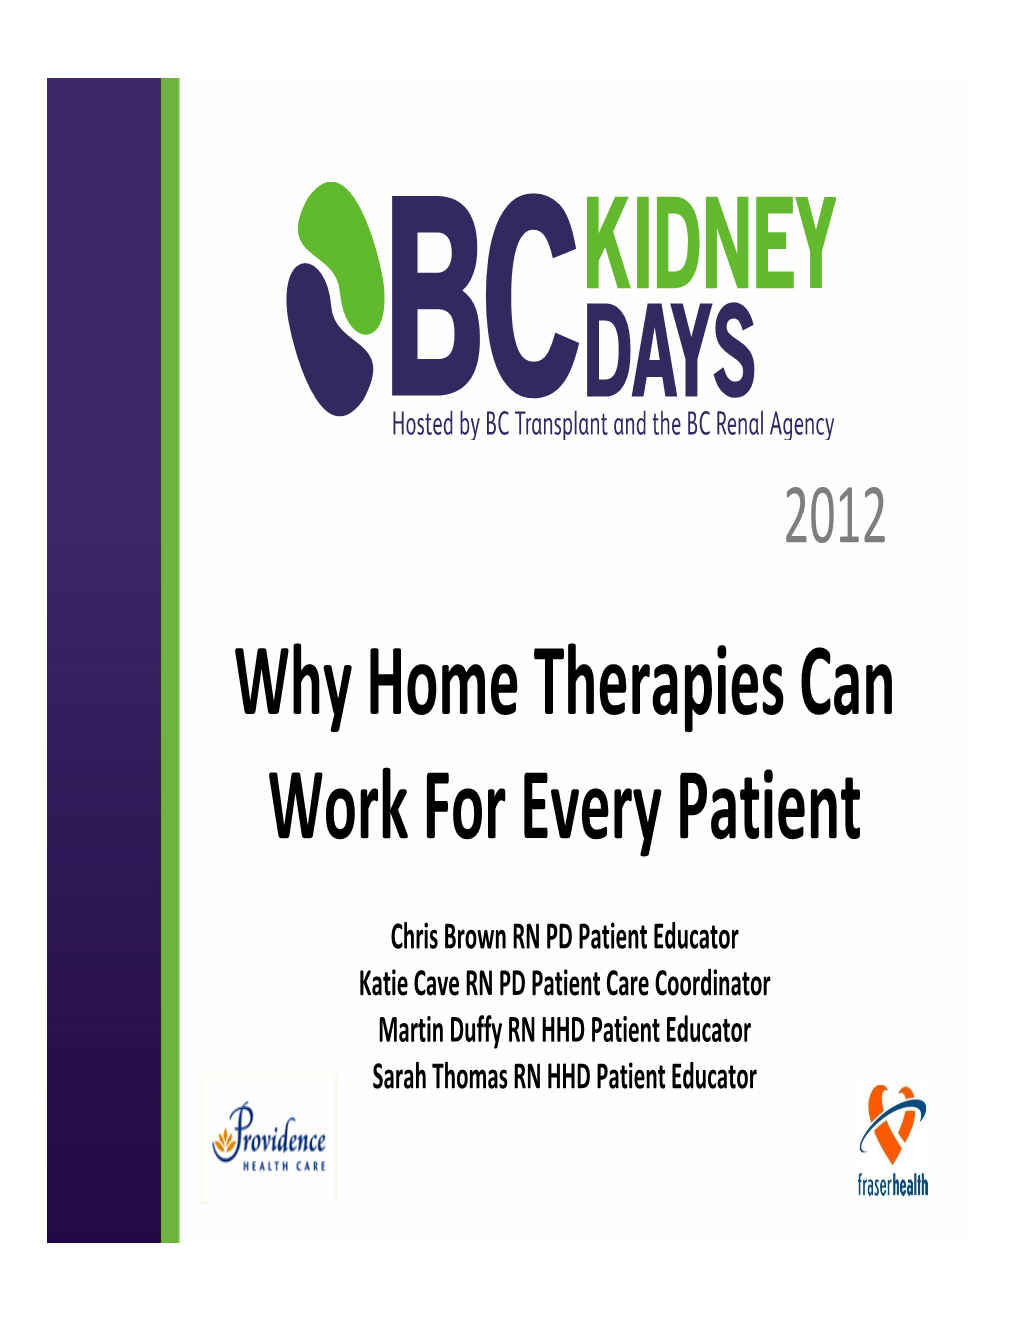 Why Home Therapies Can Work for Every Patient